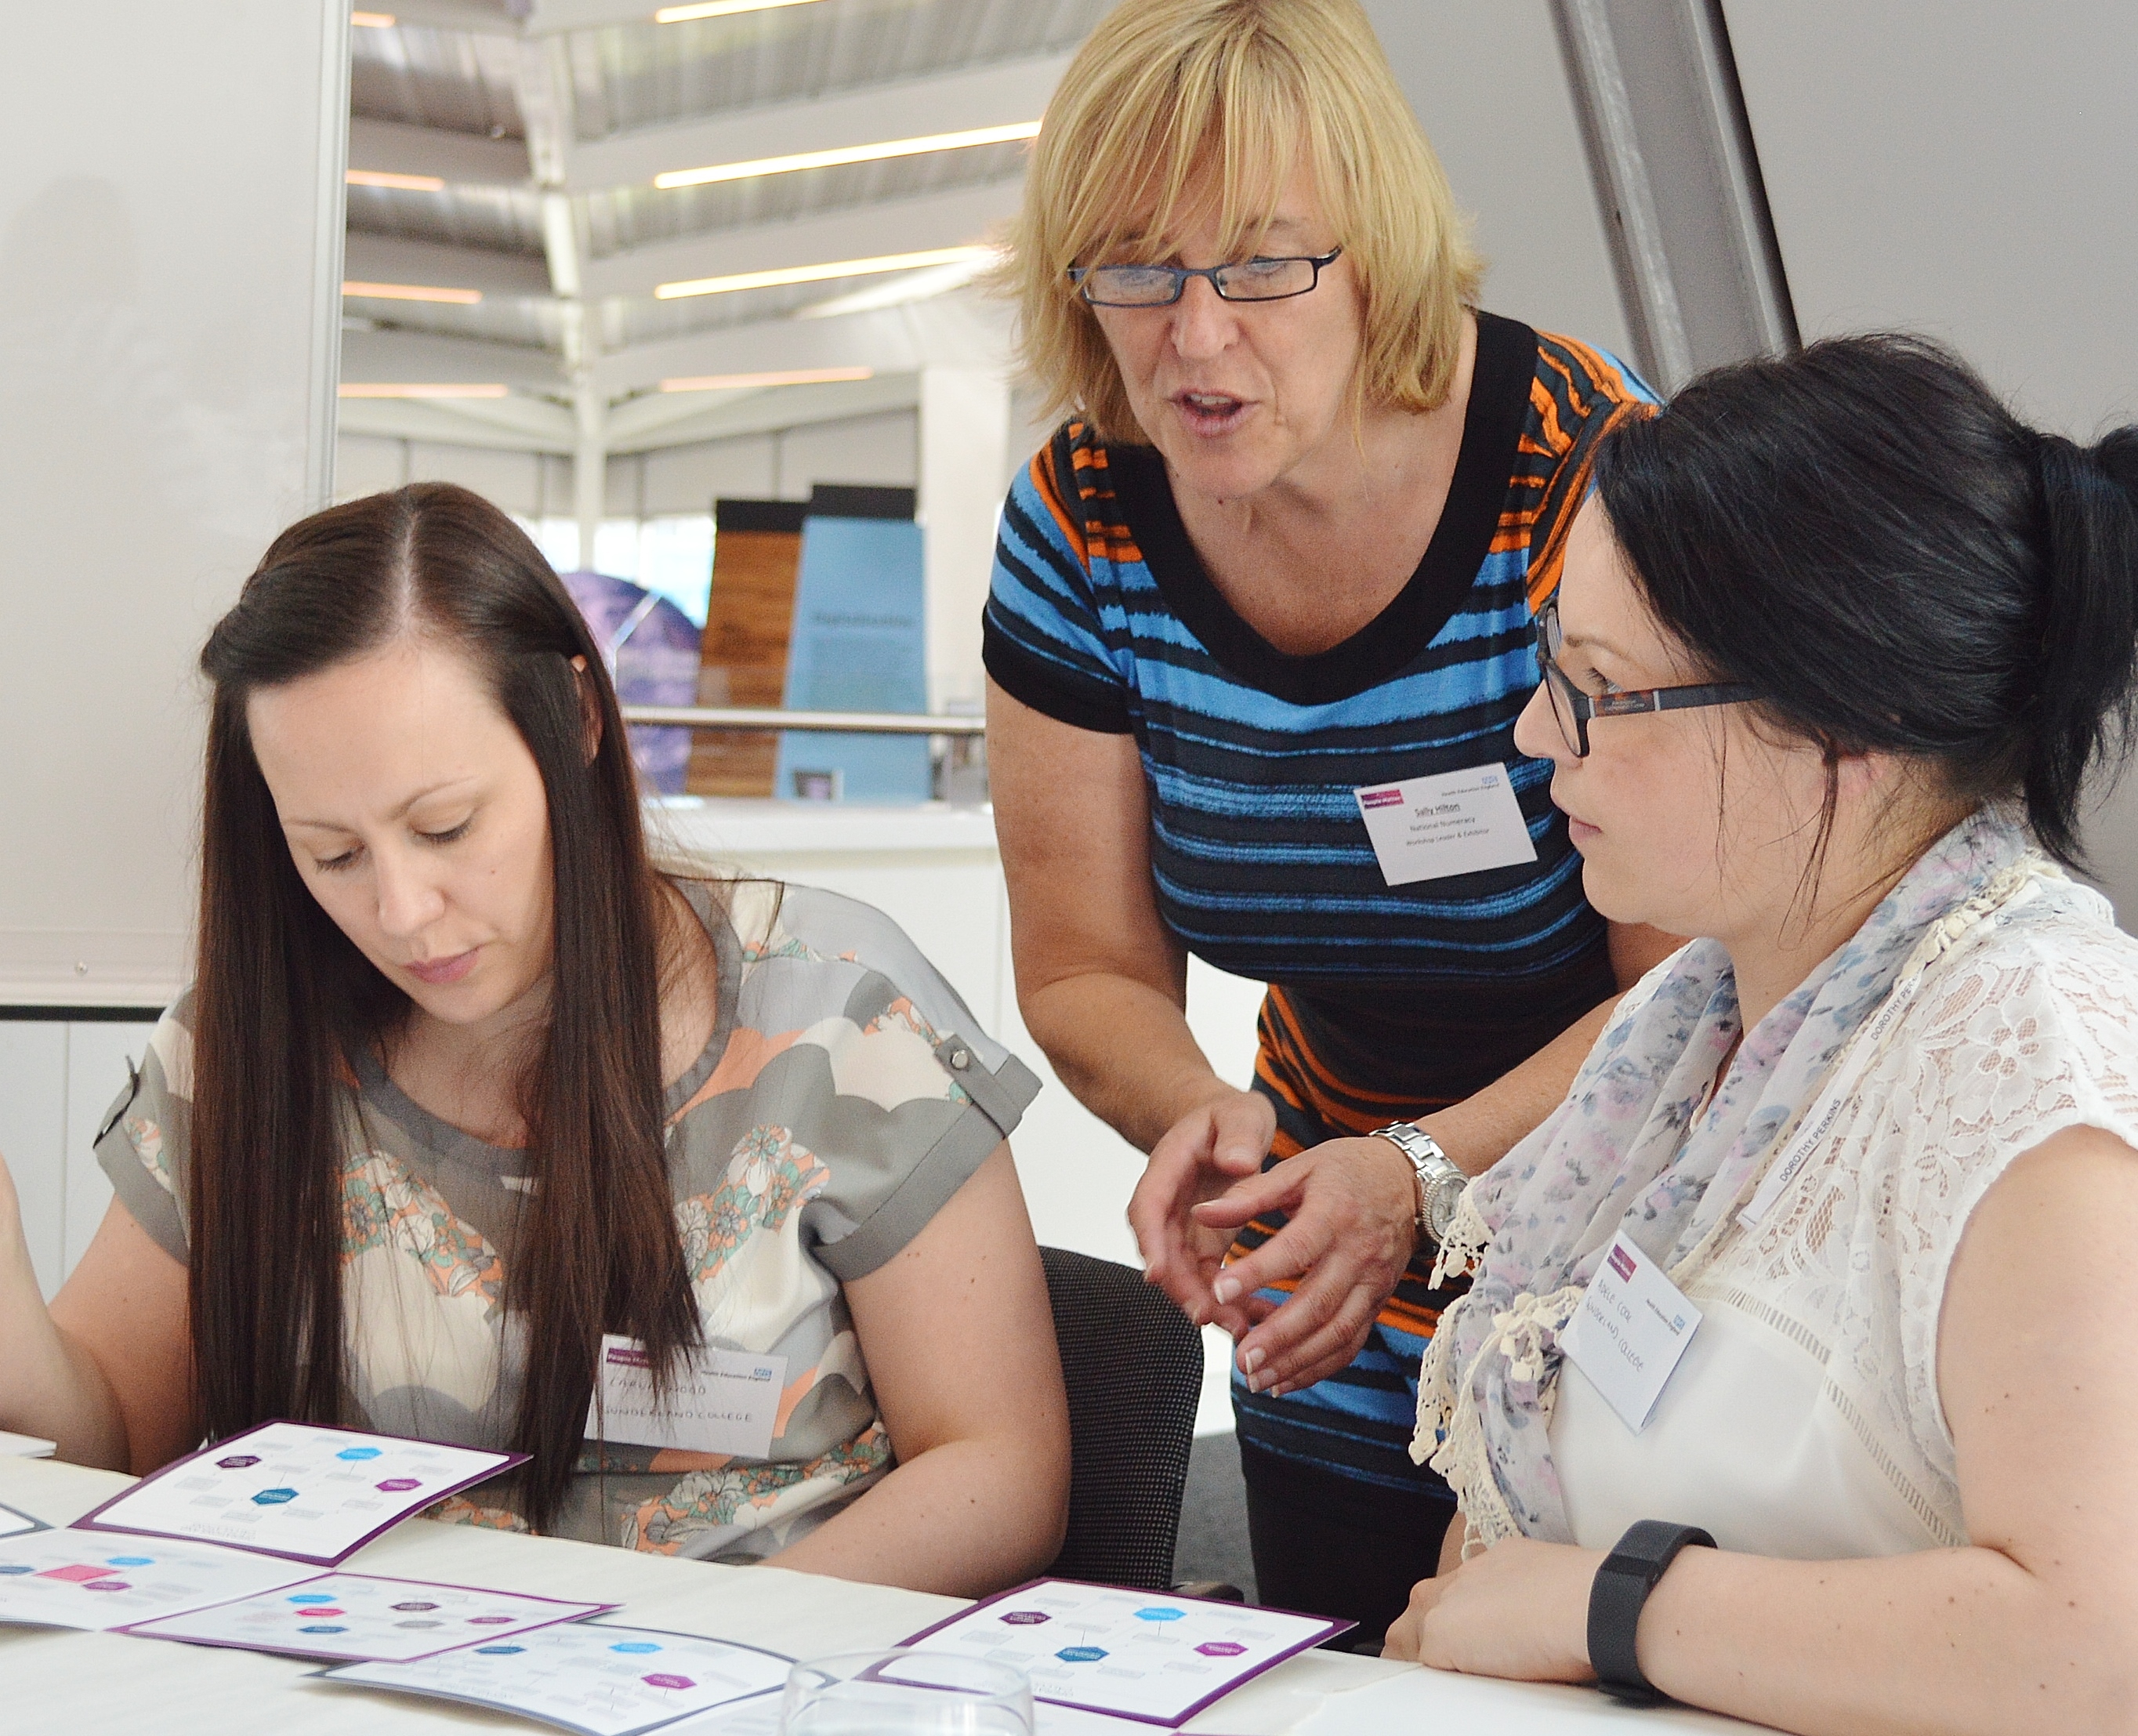 National Numeracy's National Relationships Manager Sally working with two female champions